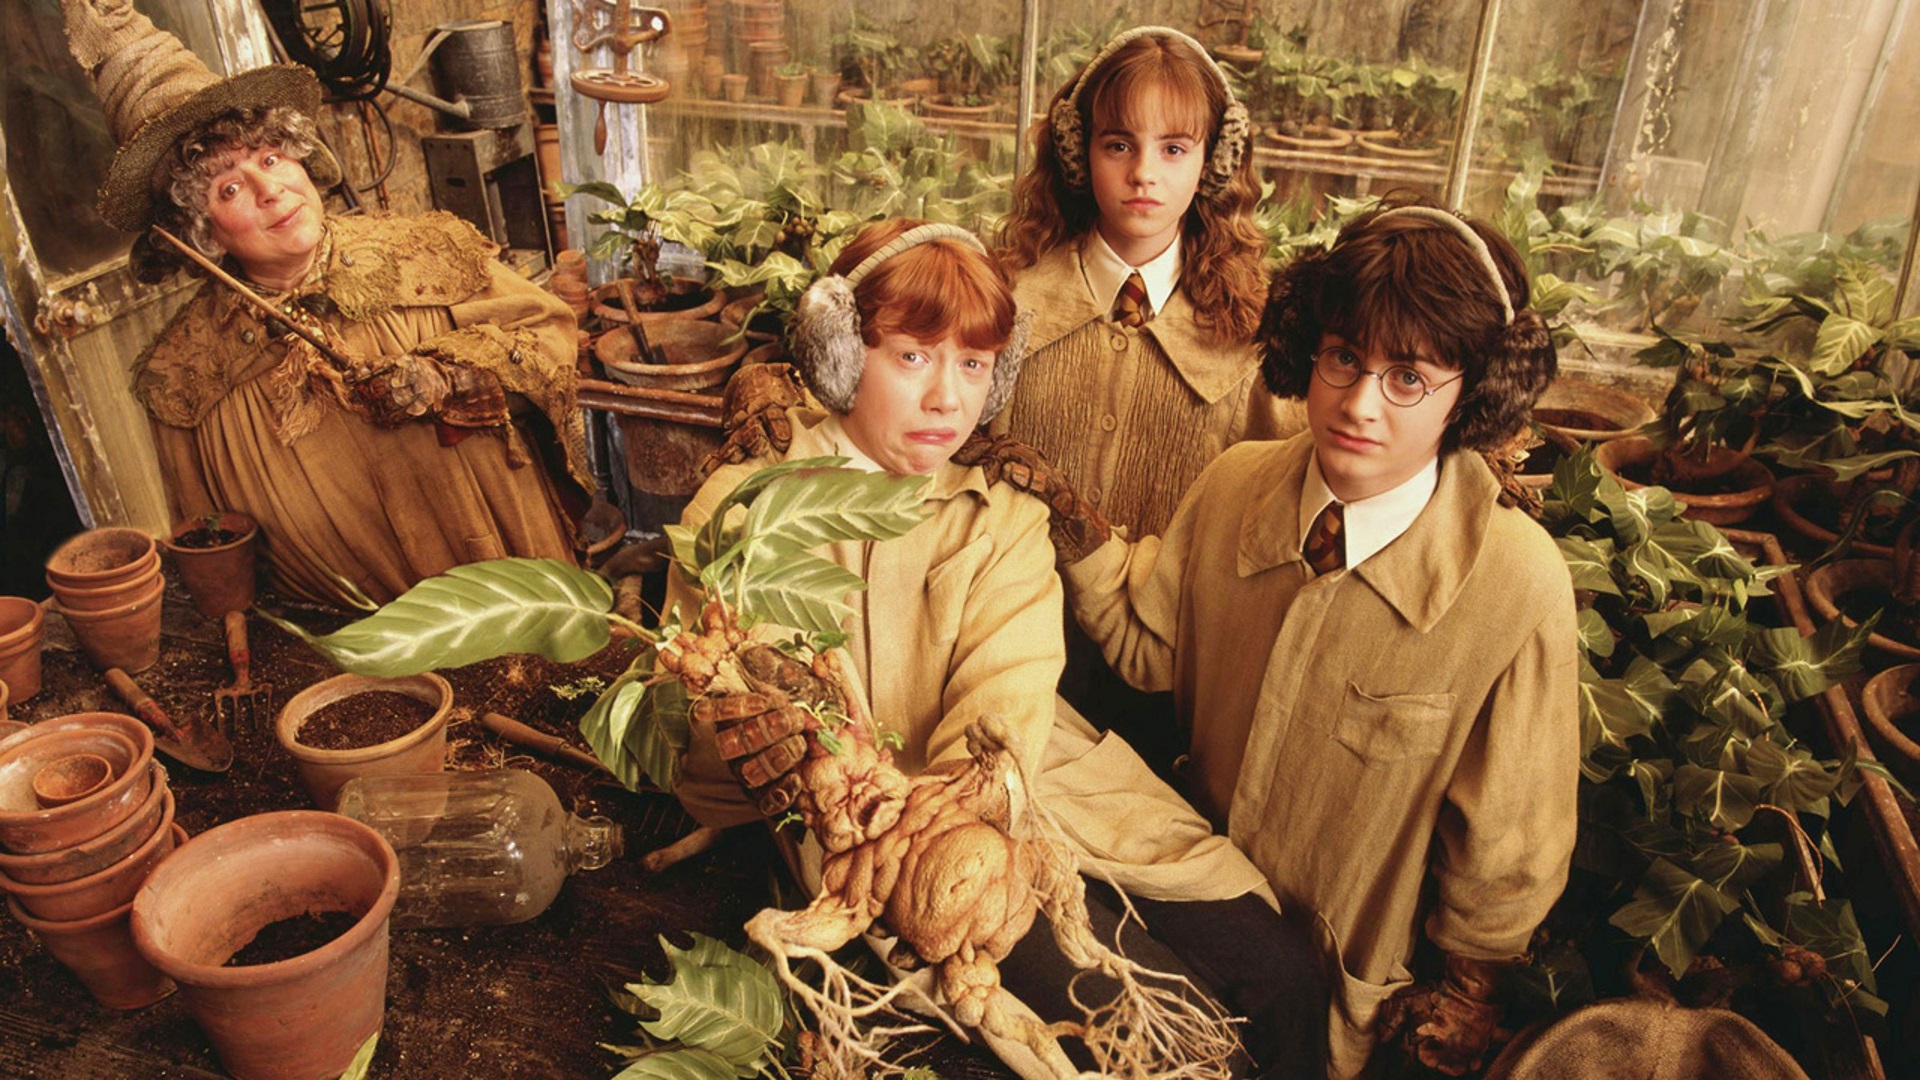 harry potter and the chamber of secrets, movie, daniel radcliffe, emma watson, harry potter, hermione granger, miriam margolyes, pomona sprout, ron weasley, rupert grint